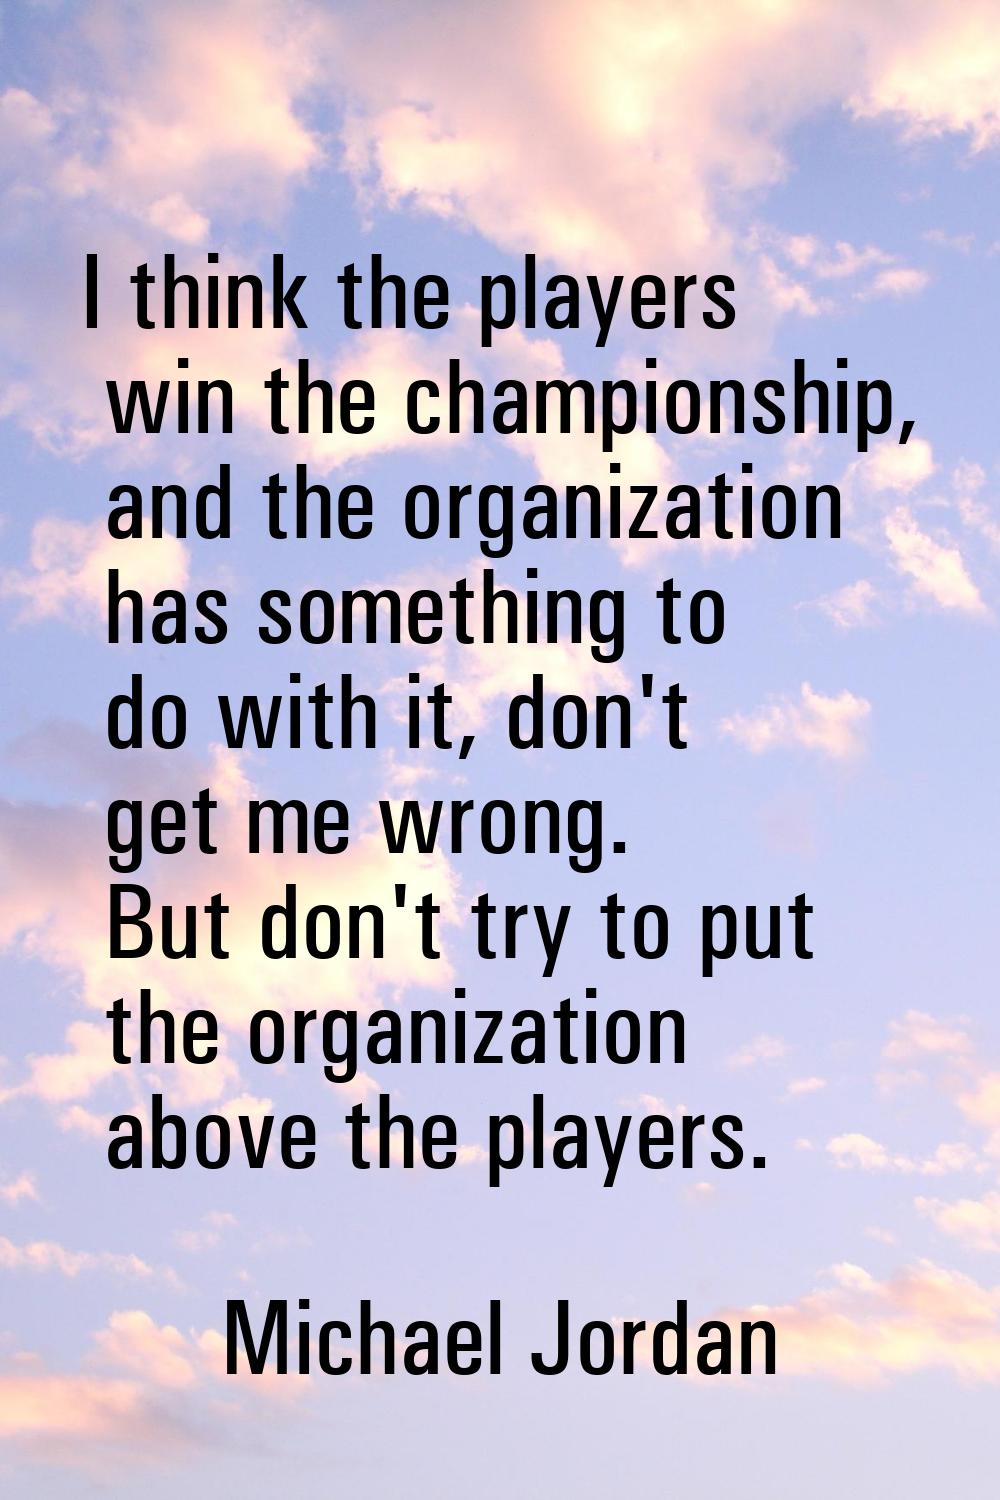 I think the players win the championship, and the organization has something to do with it, don't g